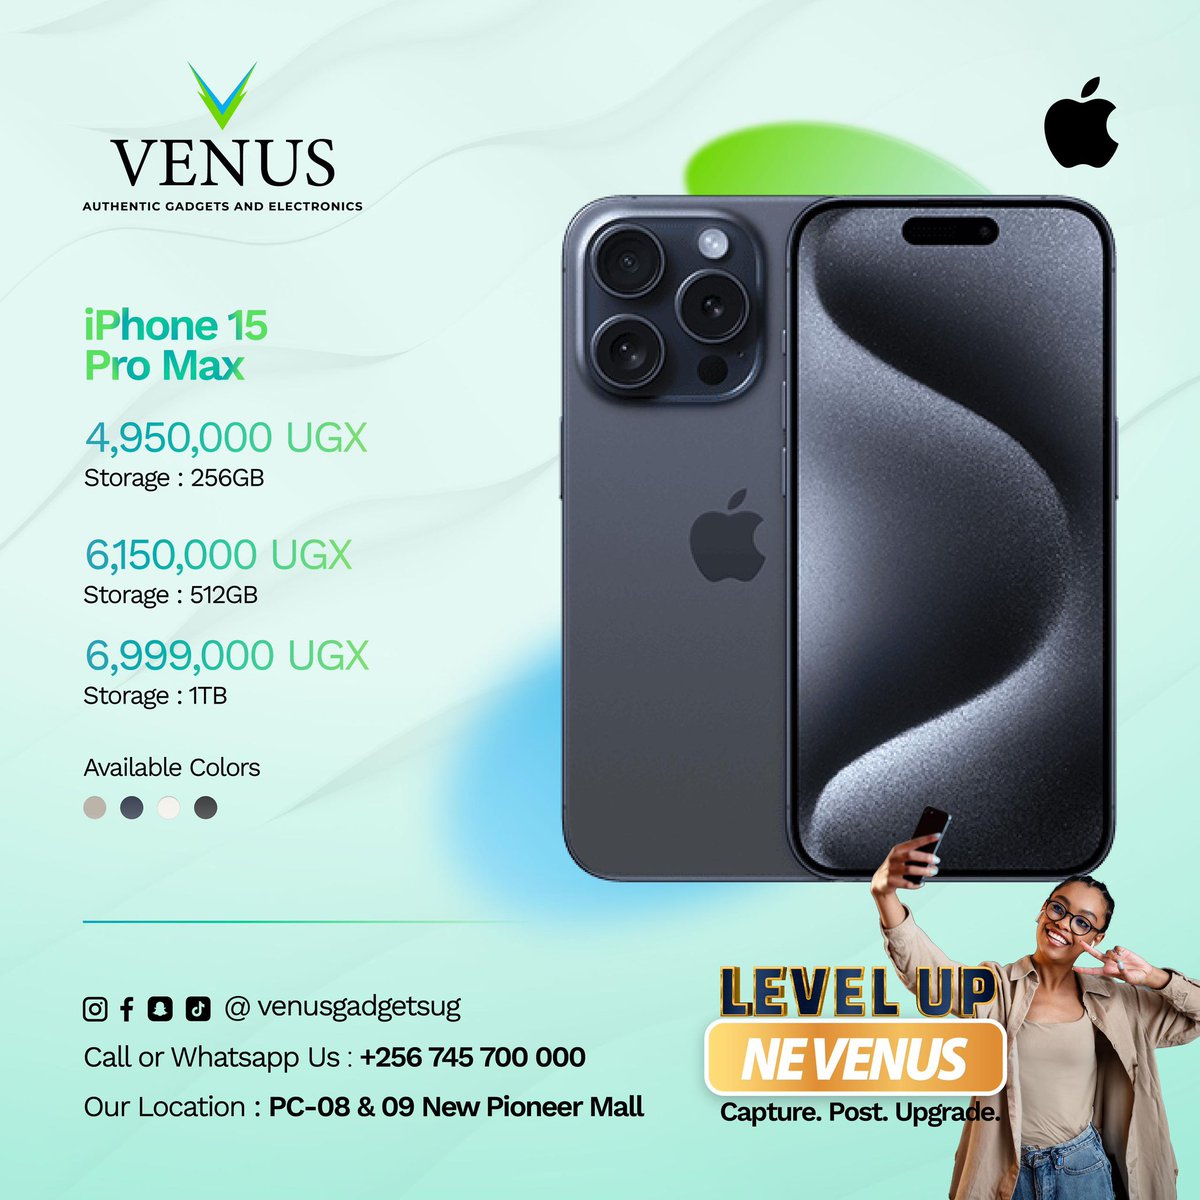 🚨🚨OFFER ALERT🚨🚨

You can get yourself the iPhone 15 Pro & iPhone 15 Pro Max at these affordable prices.
Check out the shop now!!!
(Offer Valid till 5th May⏰)

Remember: You can also Capture➡️Post➡️Upgrade 
#LevelupneVenus